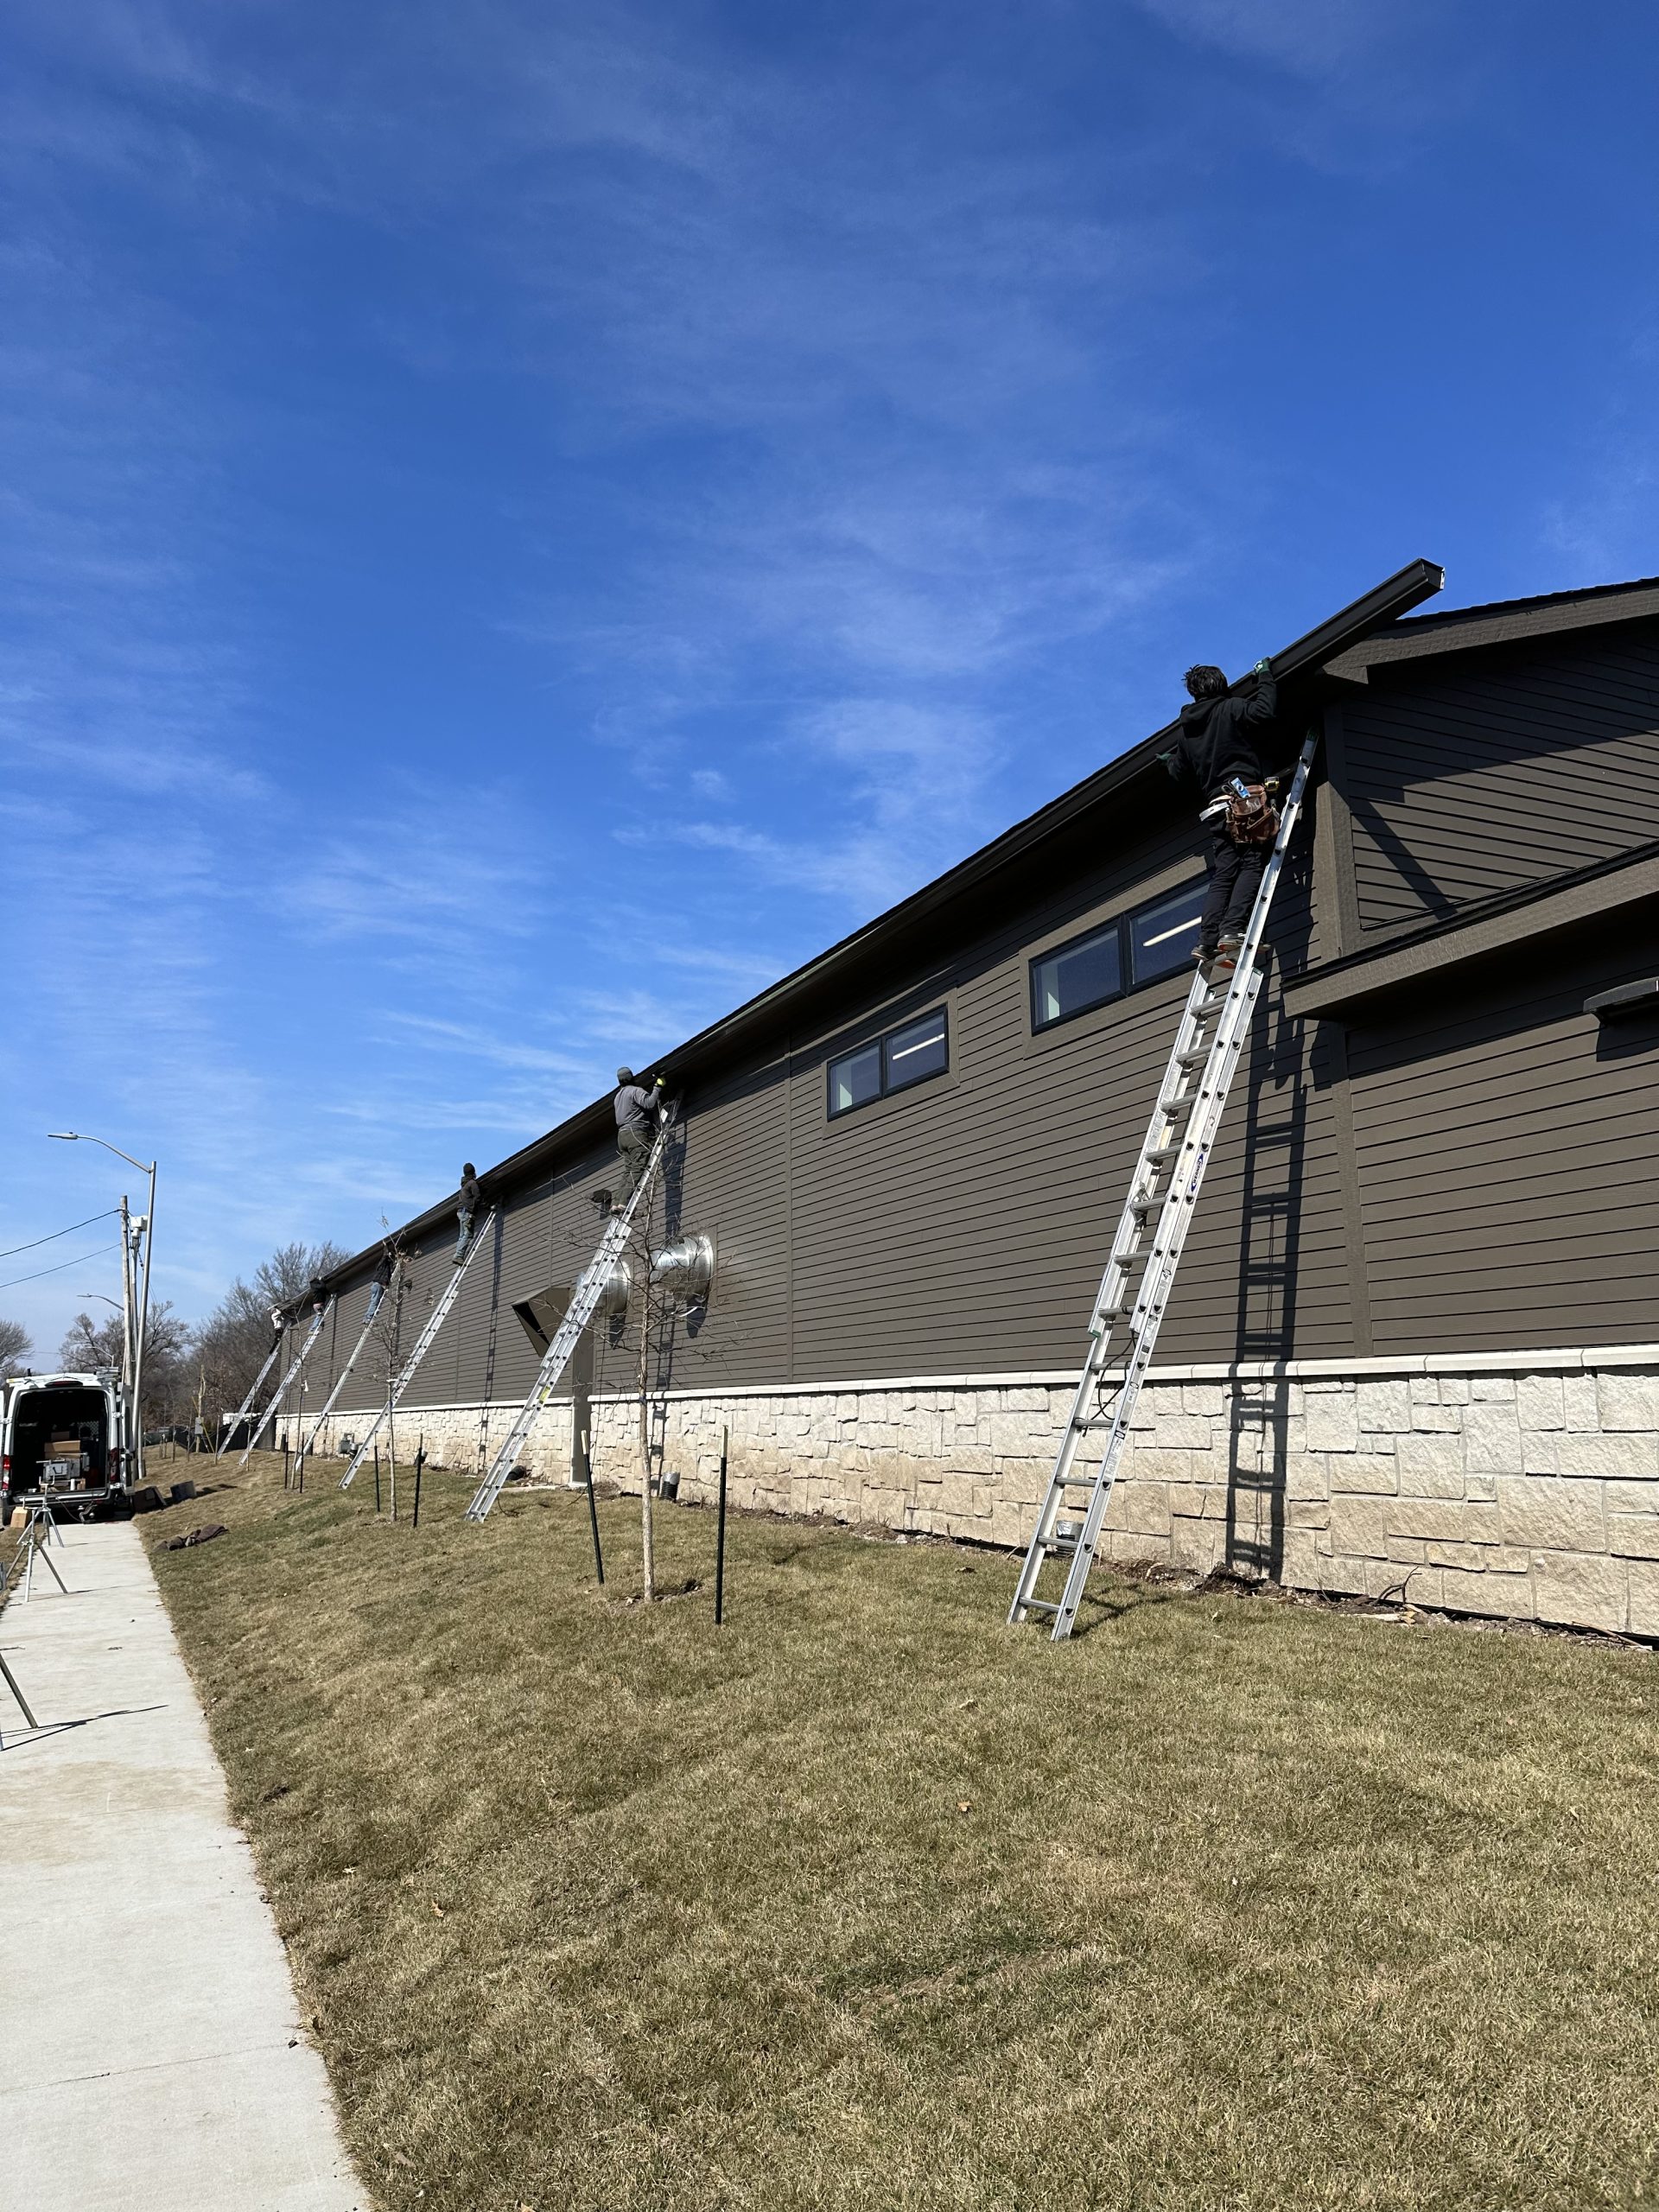 Buck Roofing installing 6" Seamless Gutters at the Milburn Country Club in Overland Park, KS